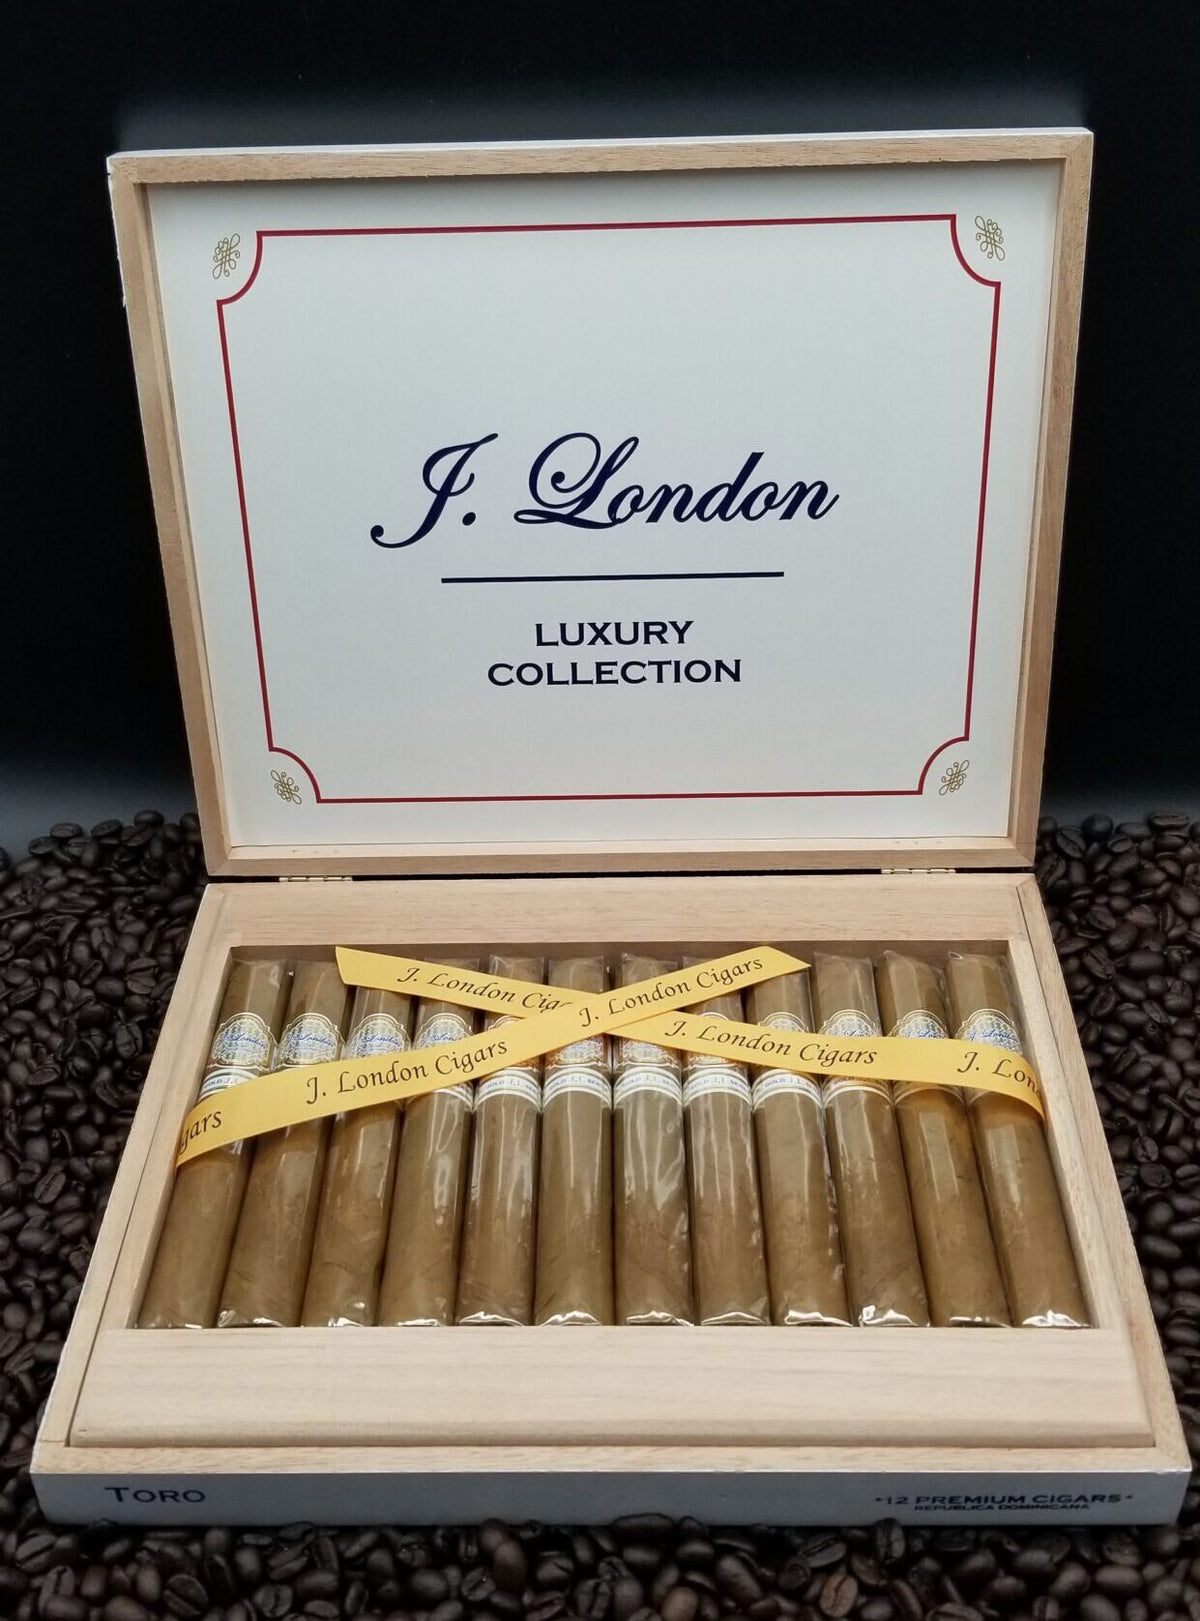 J. London Gold Series Toro cigars supplied by Sir Louis Cigars